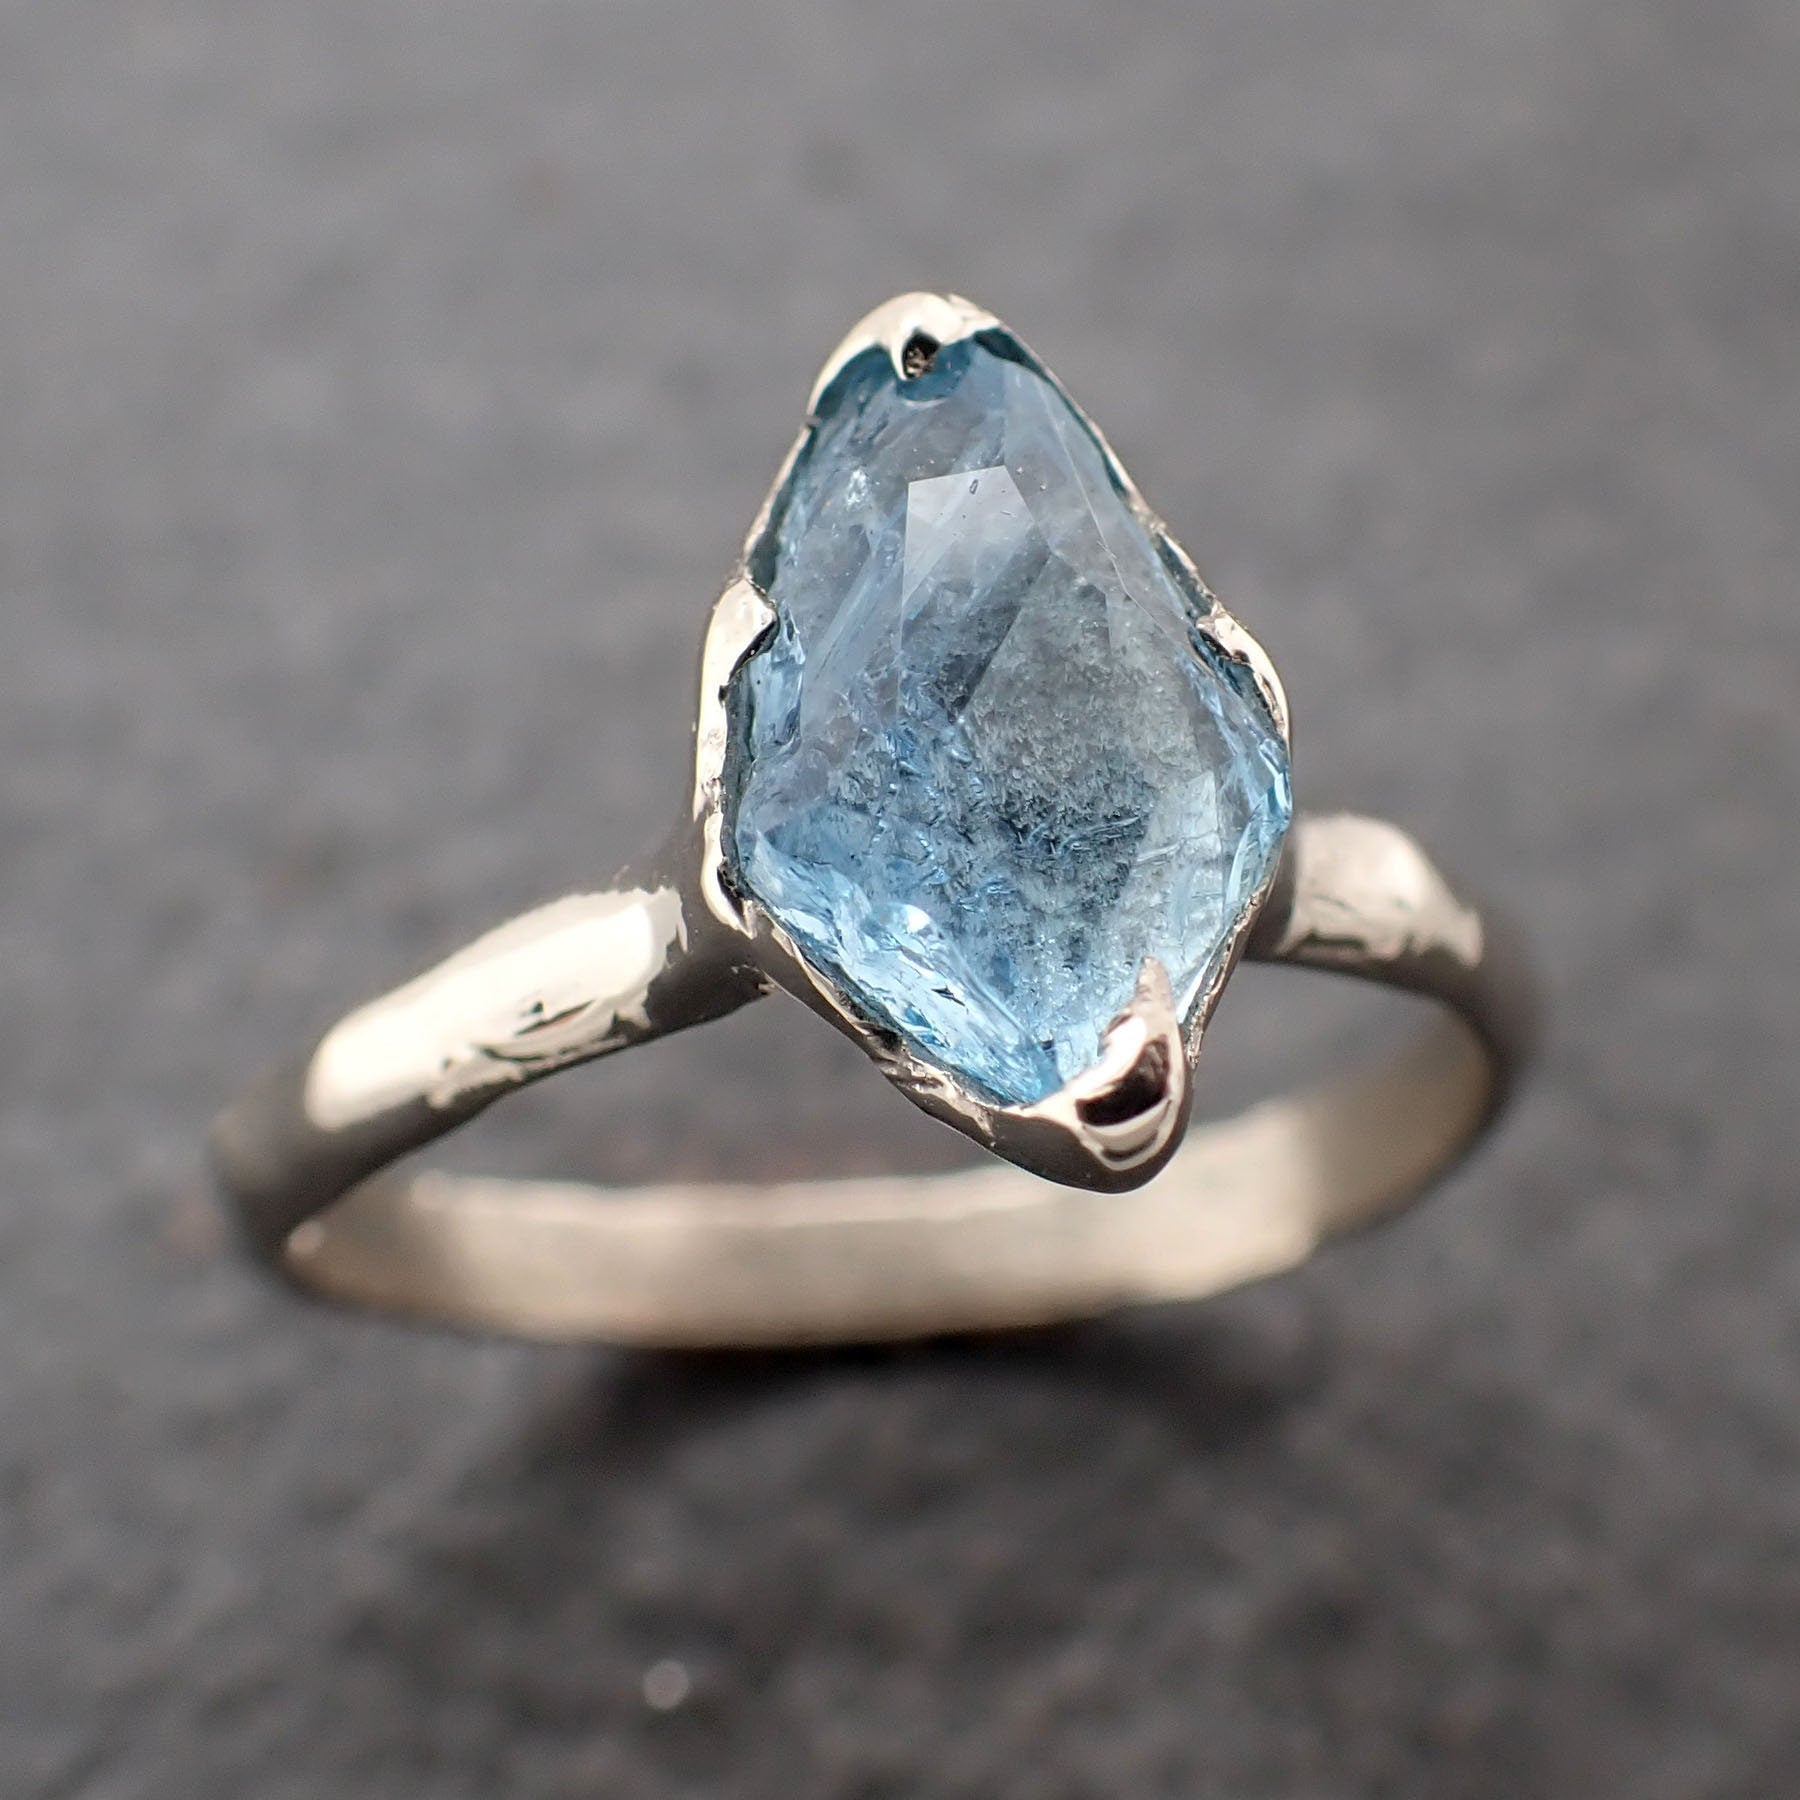 Partially faceted Aquamarine Solitaire Ring 18k gold Custom One Of a Kind Gemstone Ring Bespoke byAngeline 3152